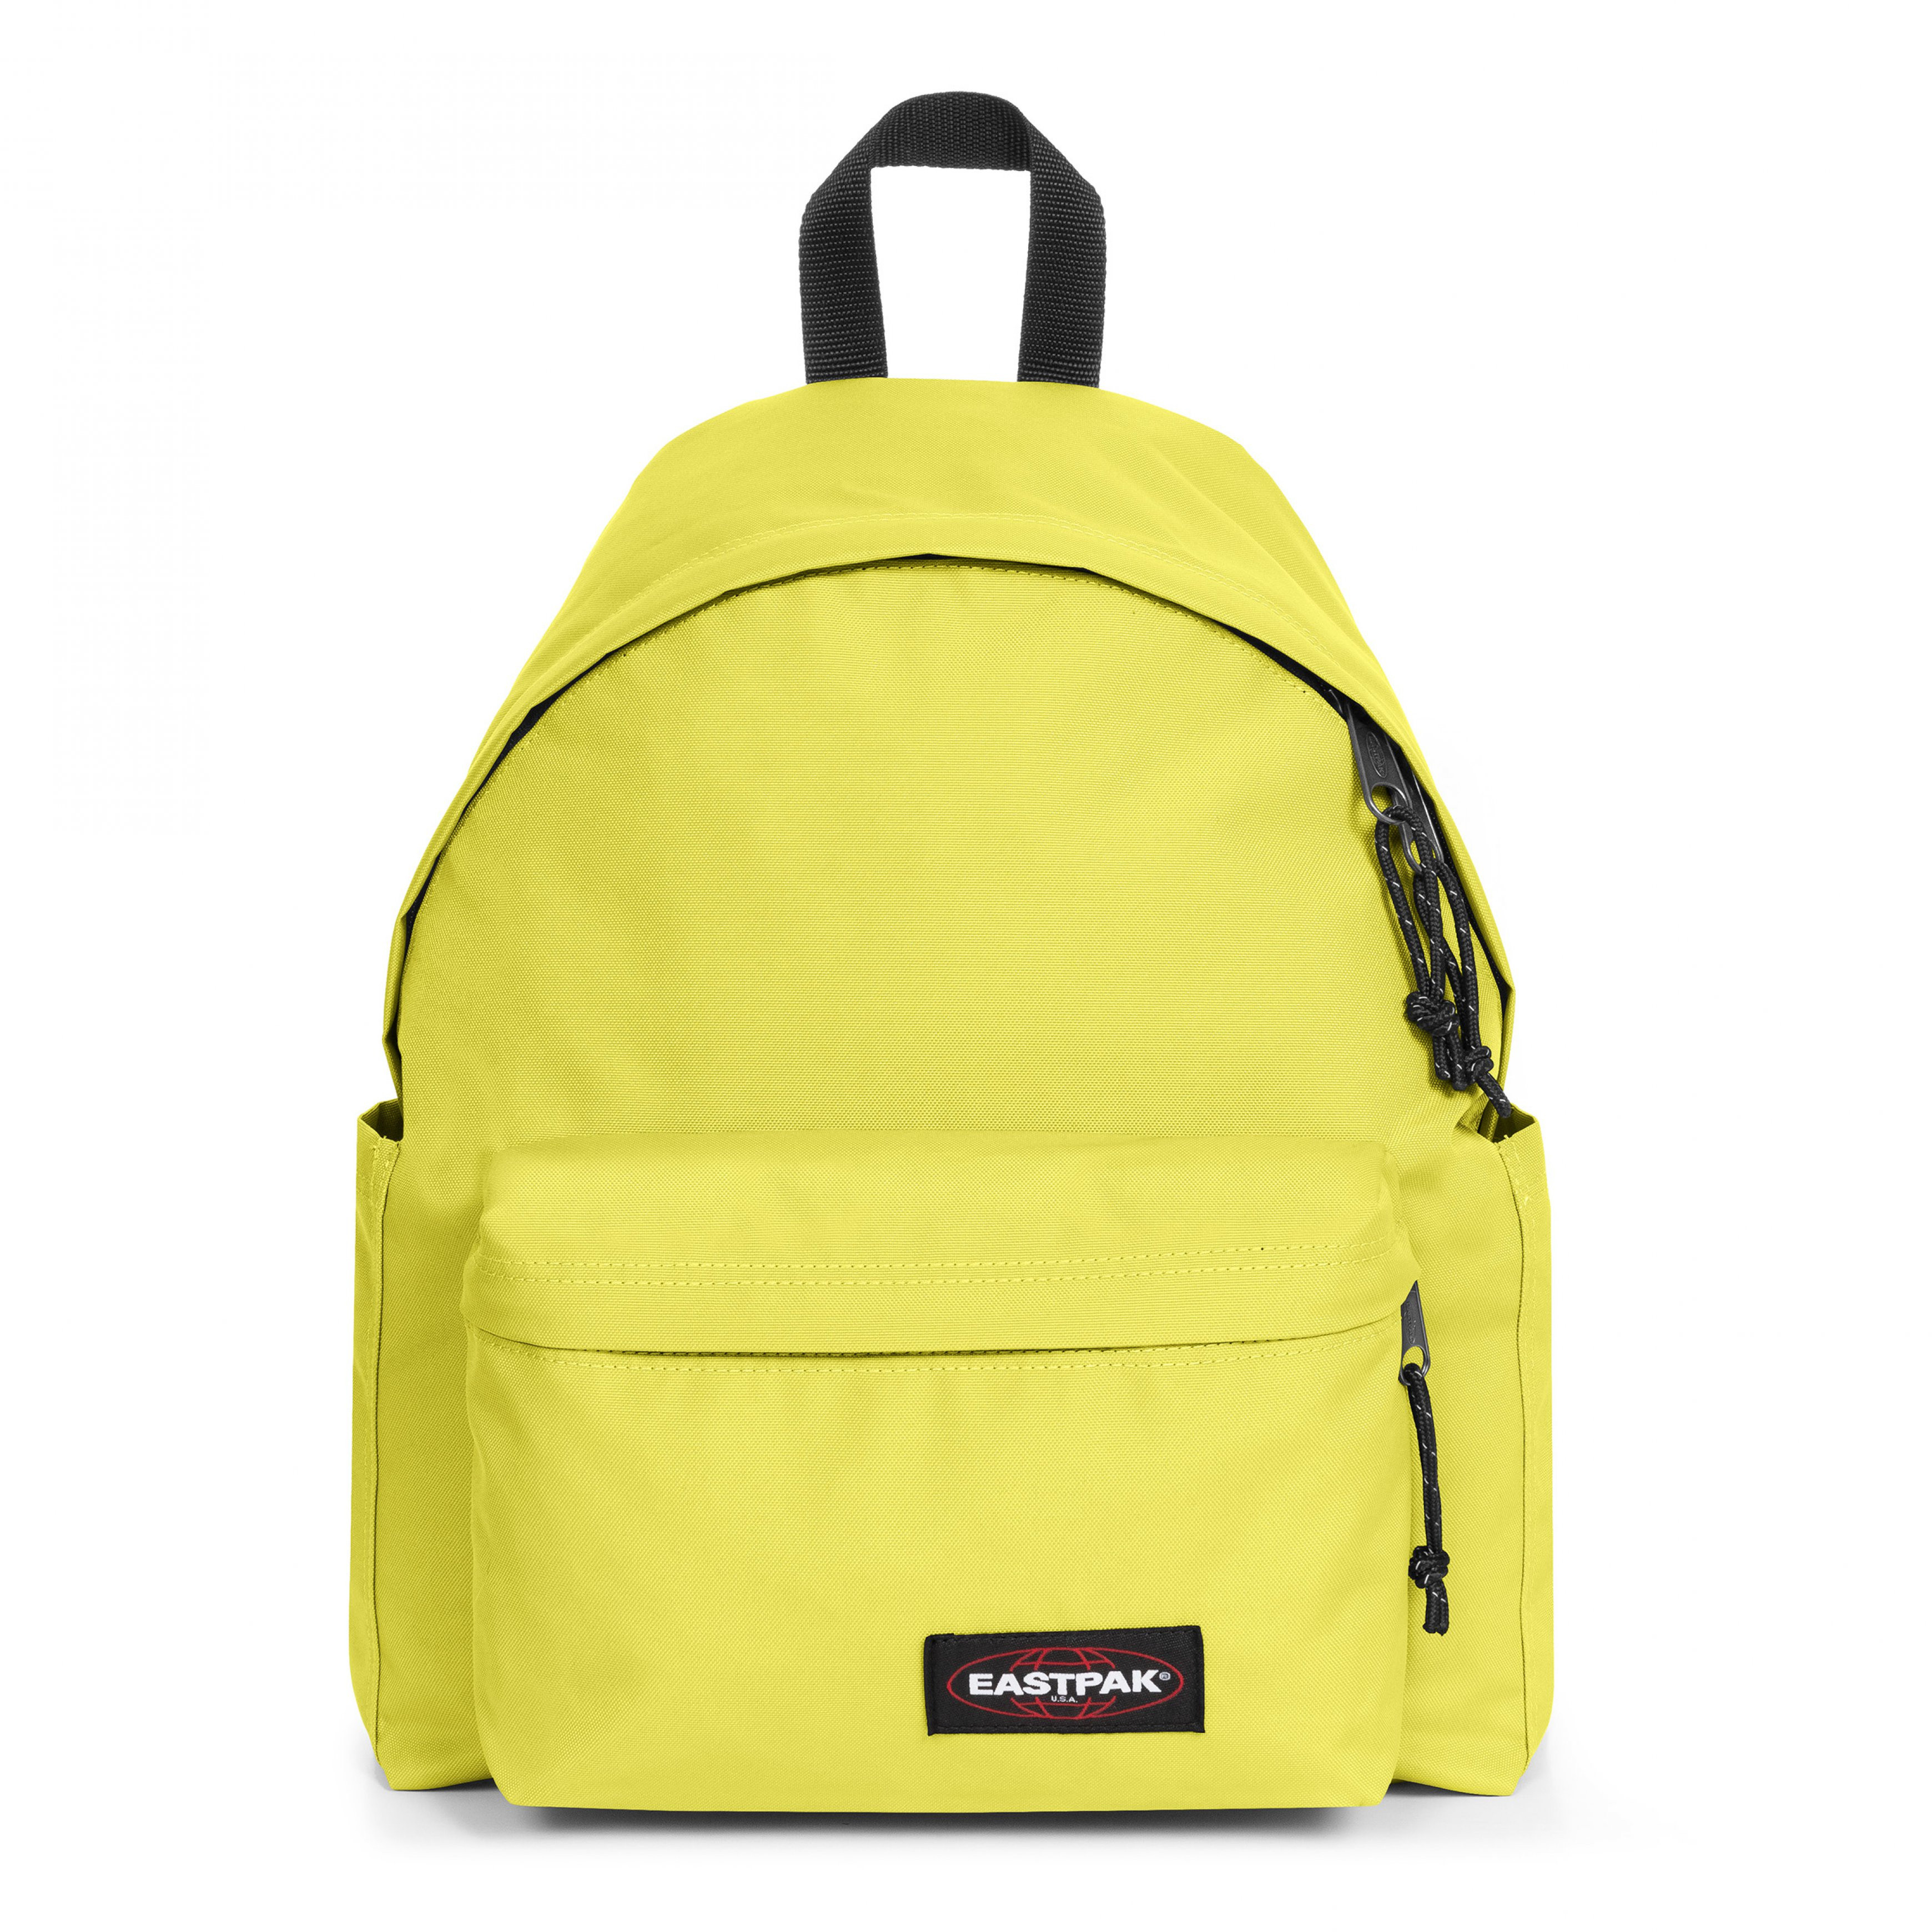 Eastpak - Day Pak'r Neon Lime backpack, Yellow, large image number 0